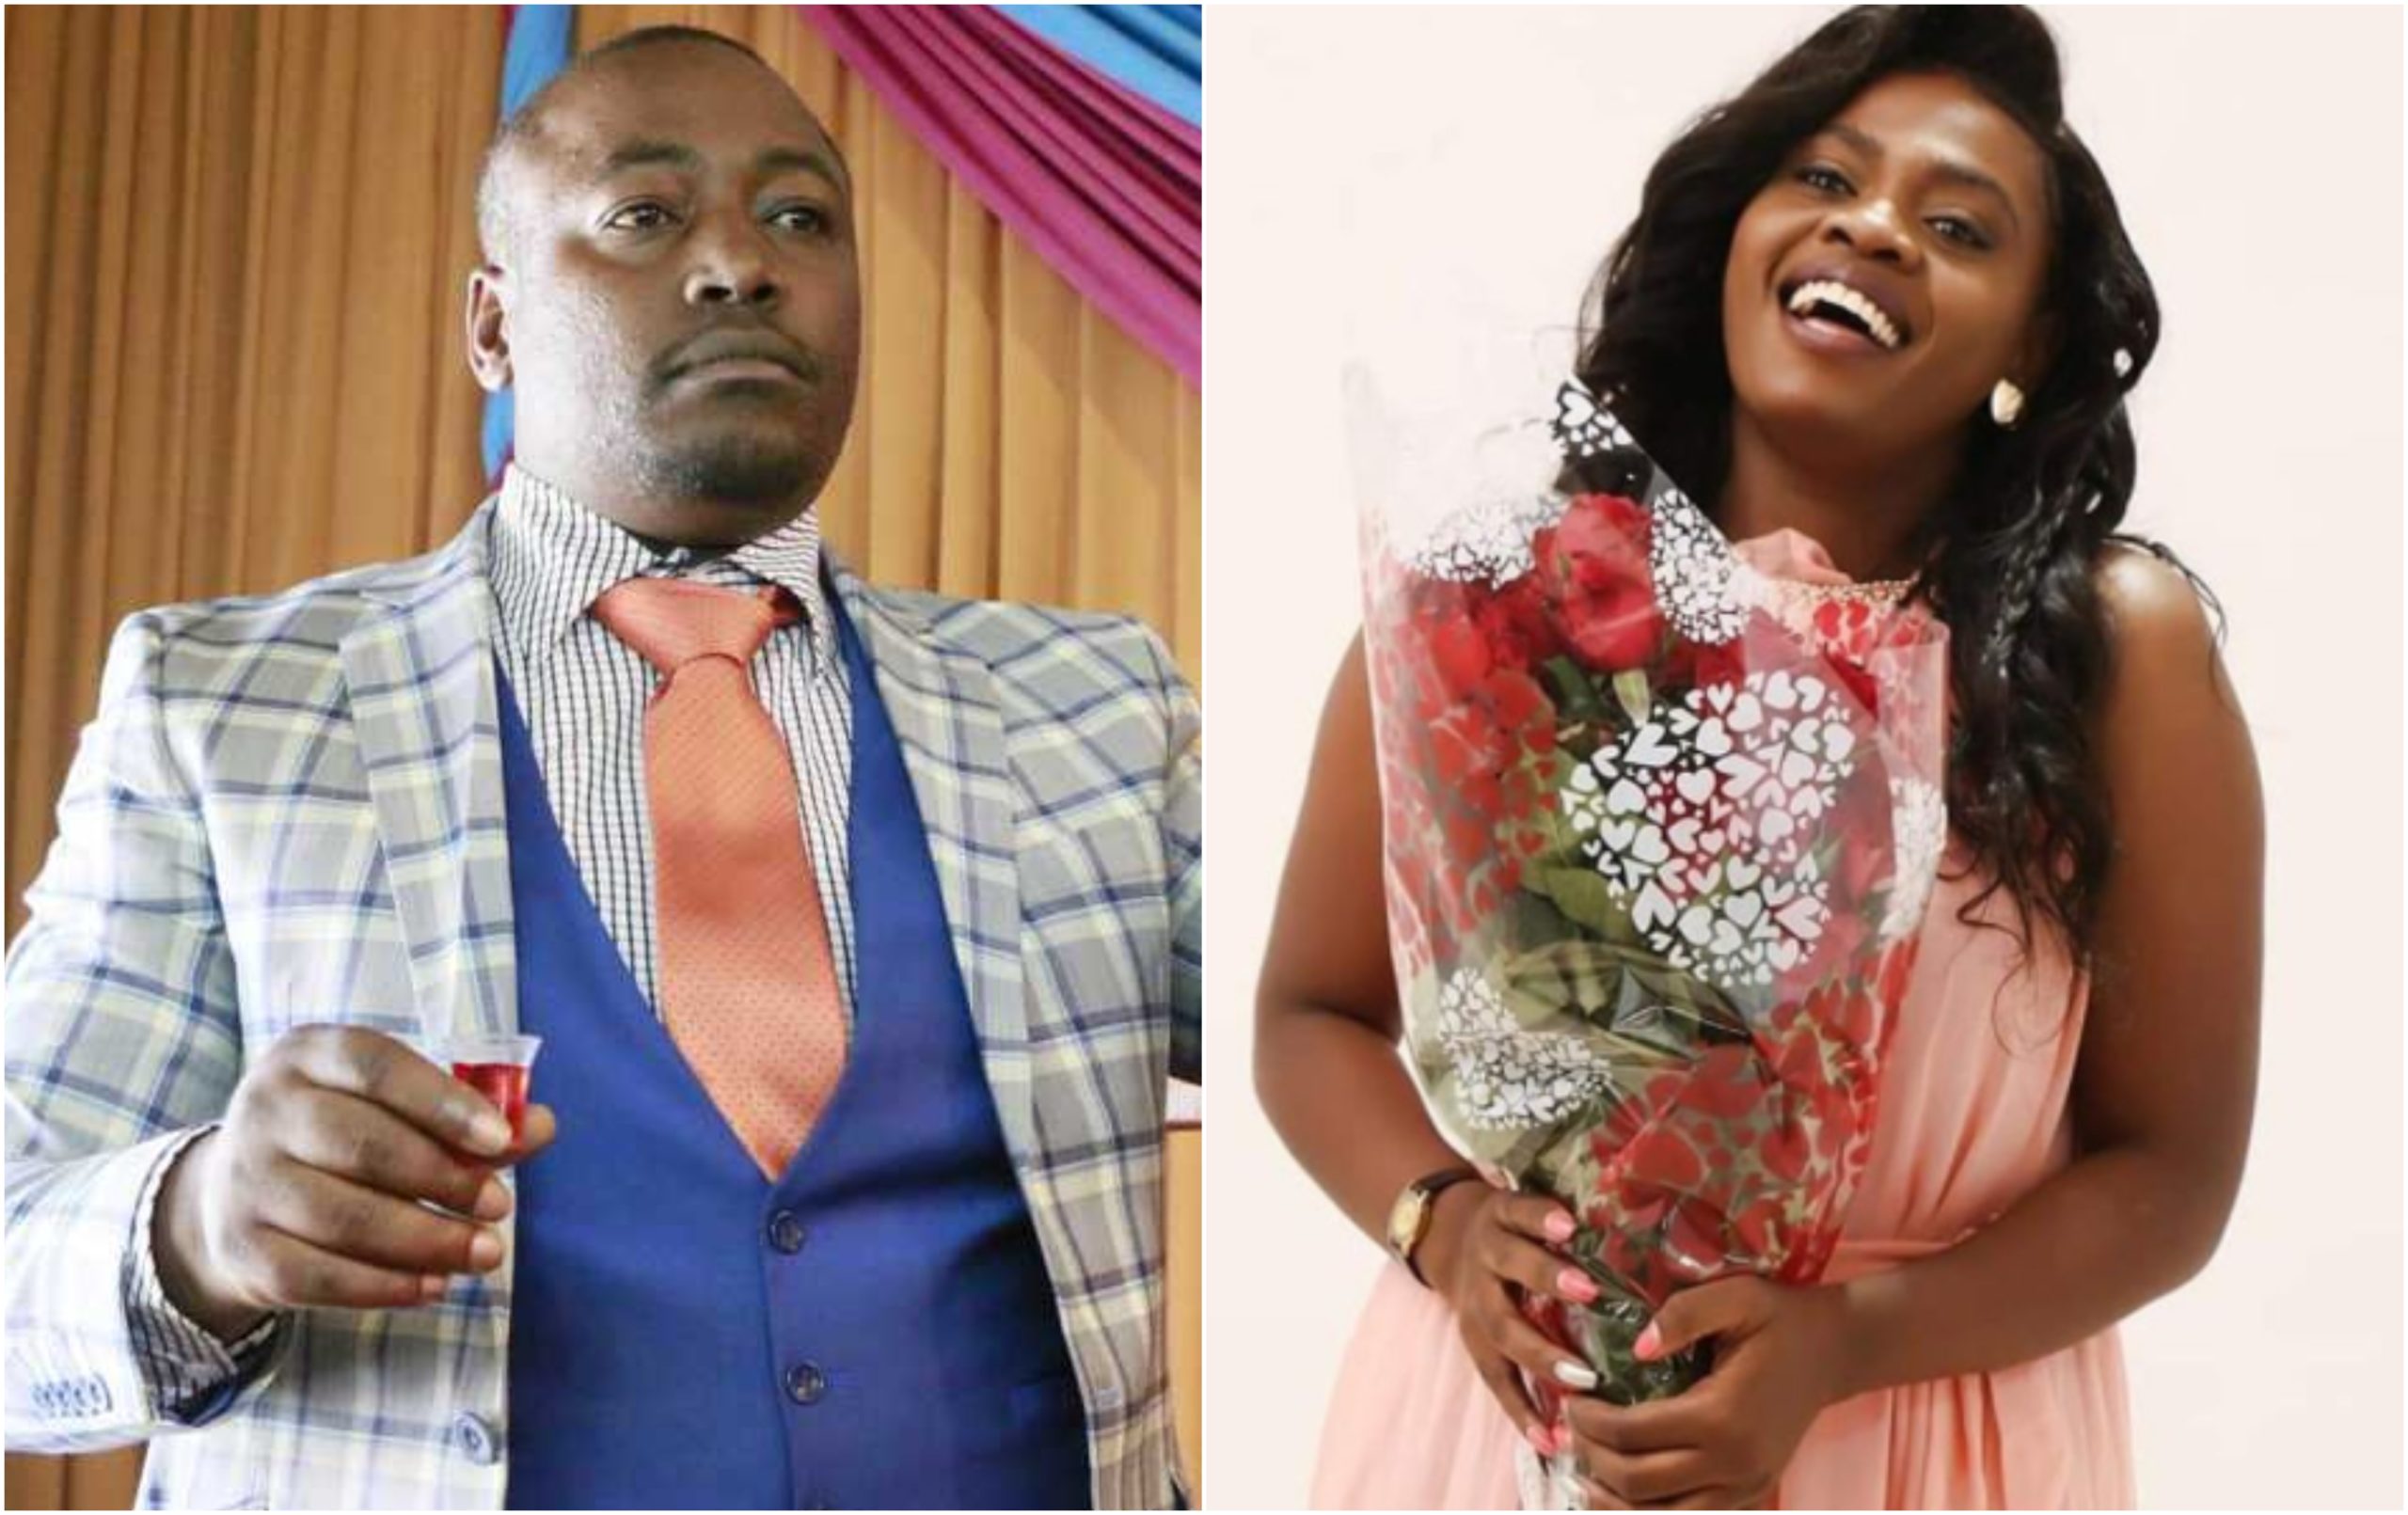 Single and searching! Pastor Kanyari’s ex Betty Bayo reveals 10 qualities she’s looking for in an ideal husband